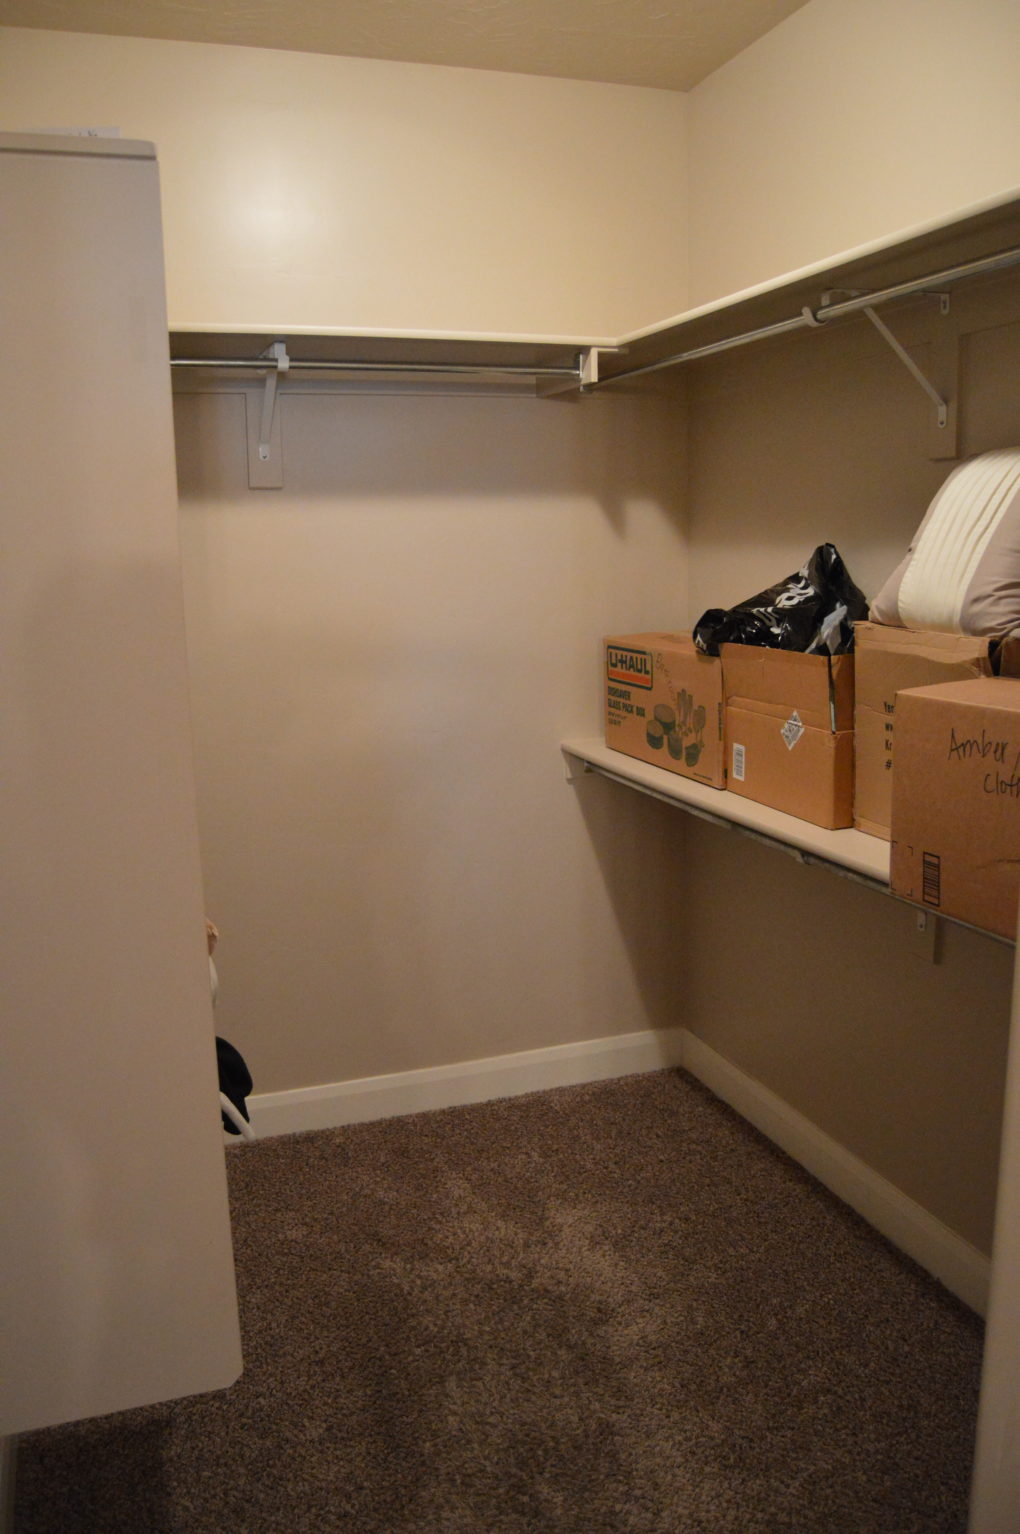 Our new house in St George, Utah. The master walk-in closet.